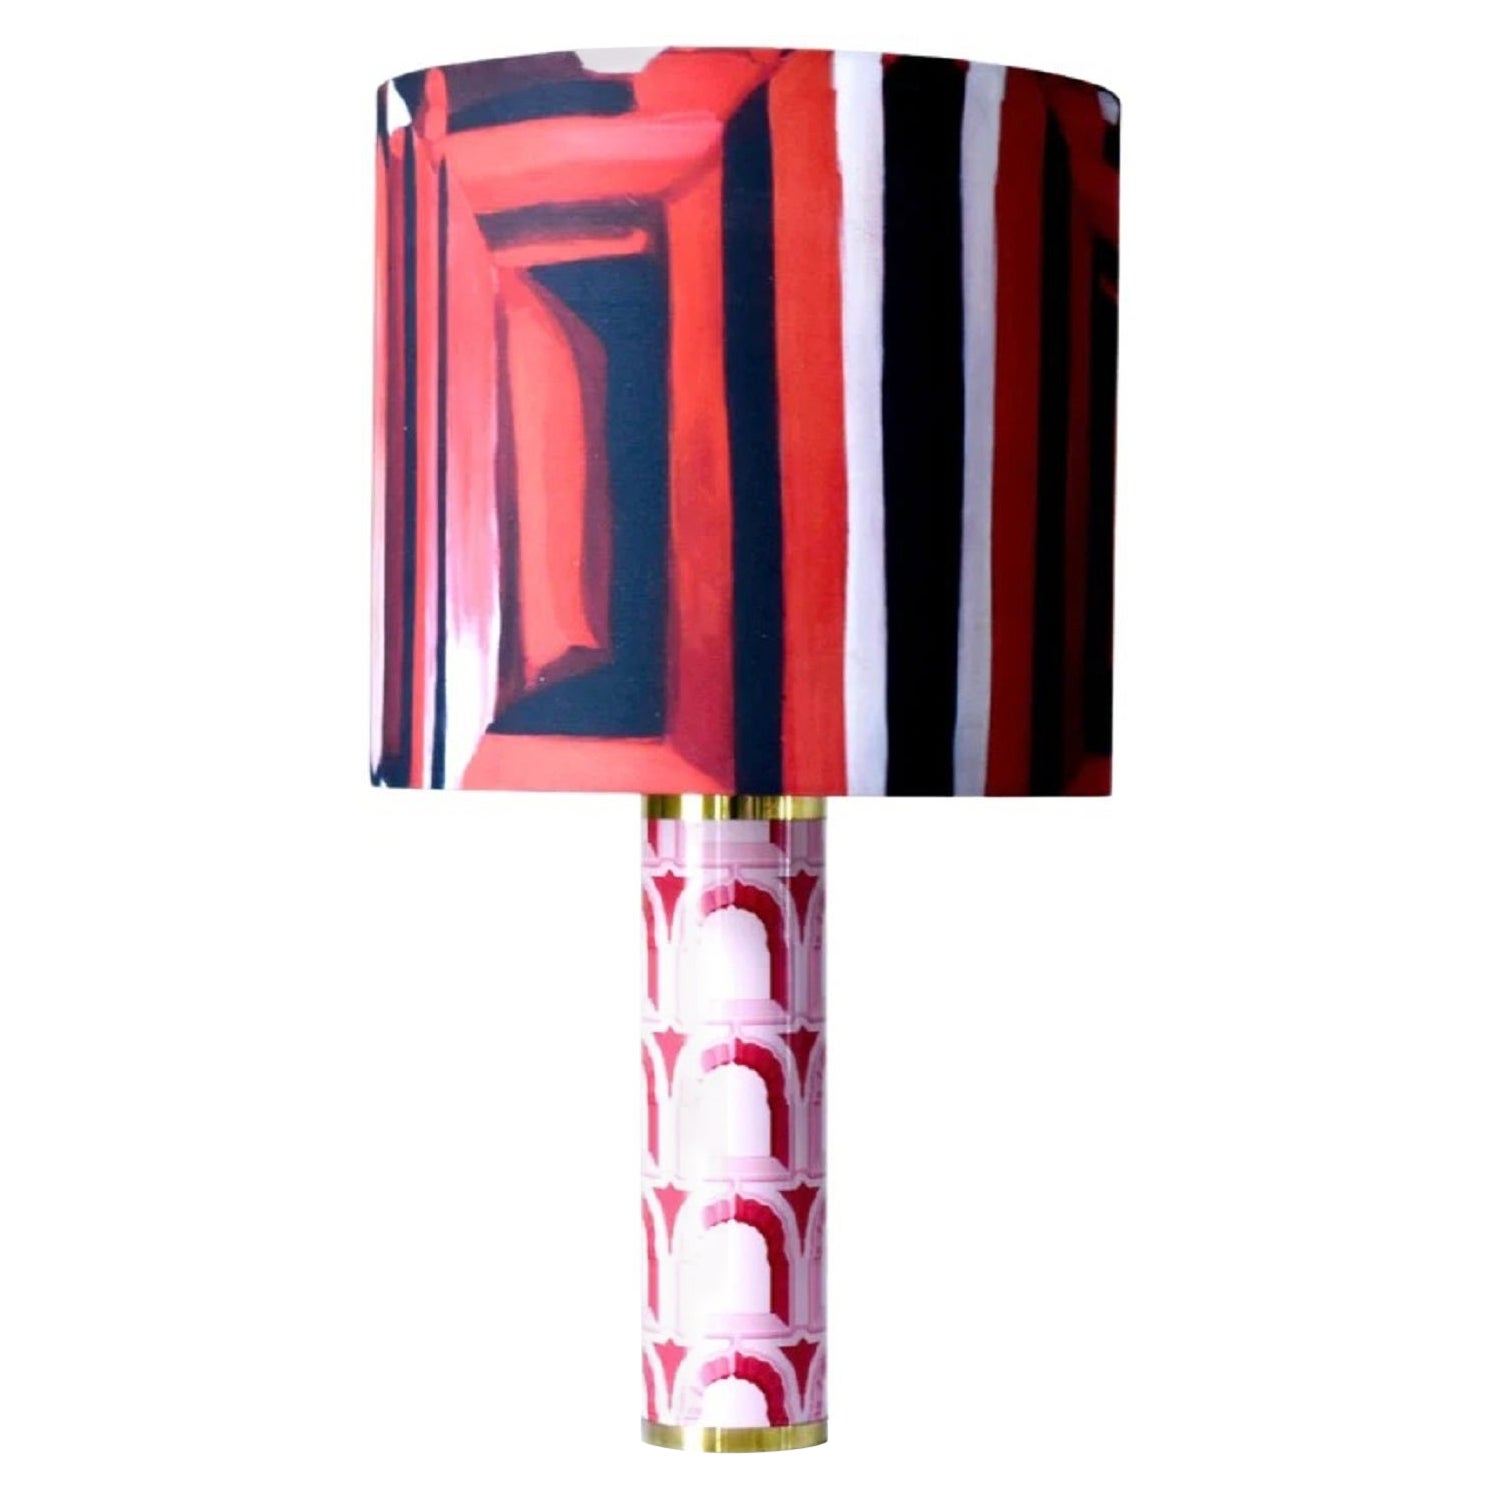 "Architectural Details" Table Lamp in Red by Ashley Longshore x Ken Fulk, 2021